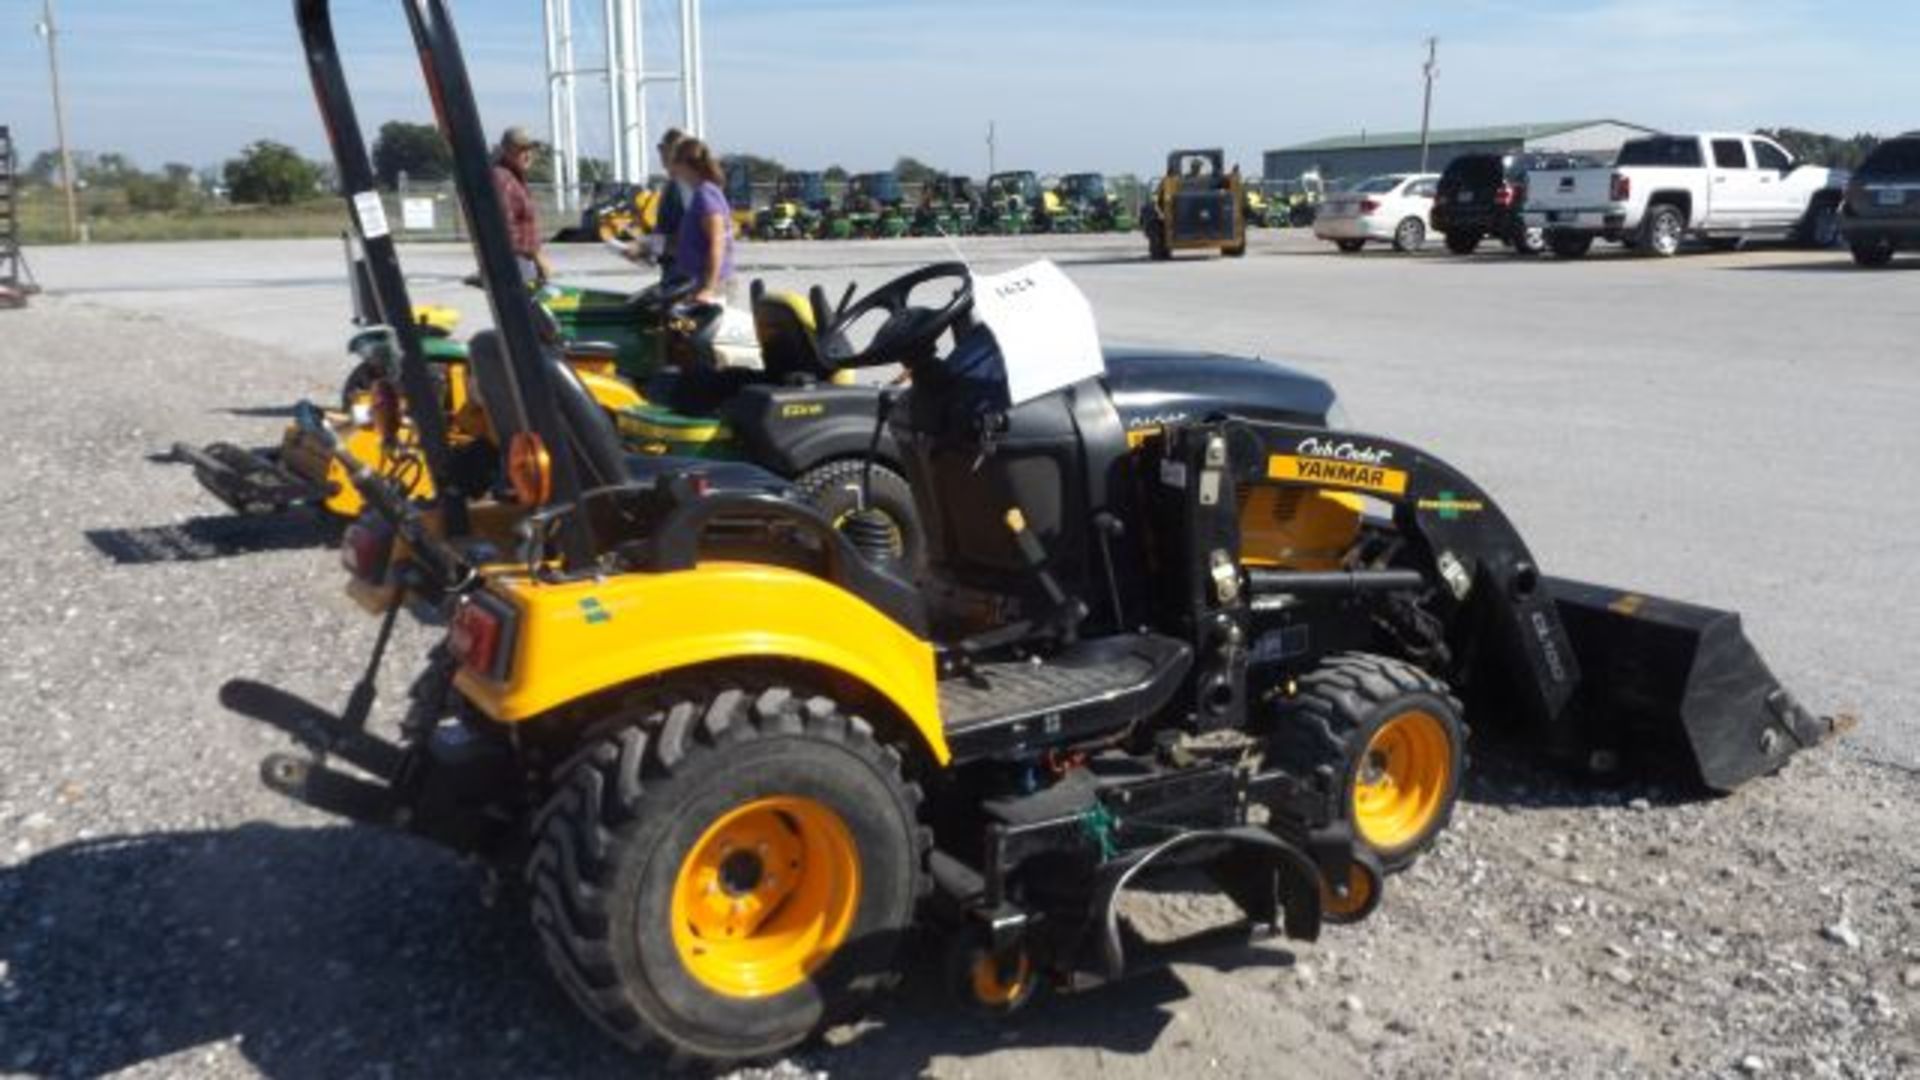 Cub Cadet SC2400 Compact Tractor #F61119, 334 hrs, MFWD, 24hp, Hydro, Joystick Hyd, 3pt, 540 Rear - Image 2 of 3